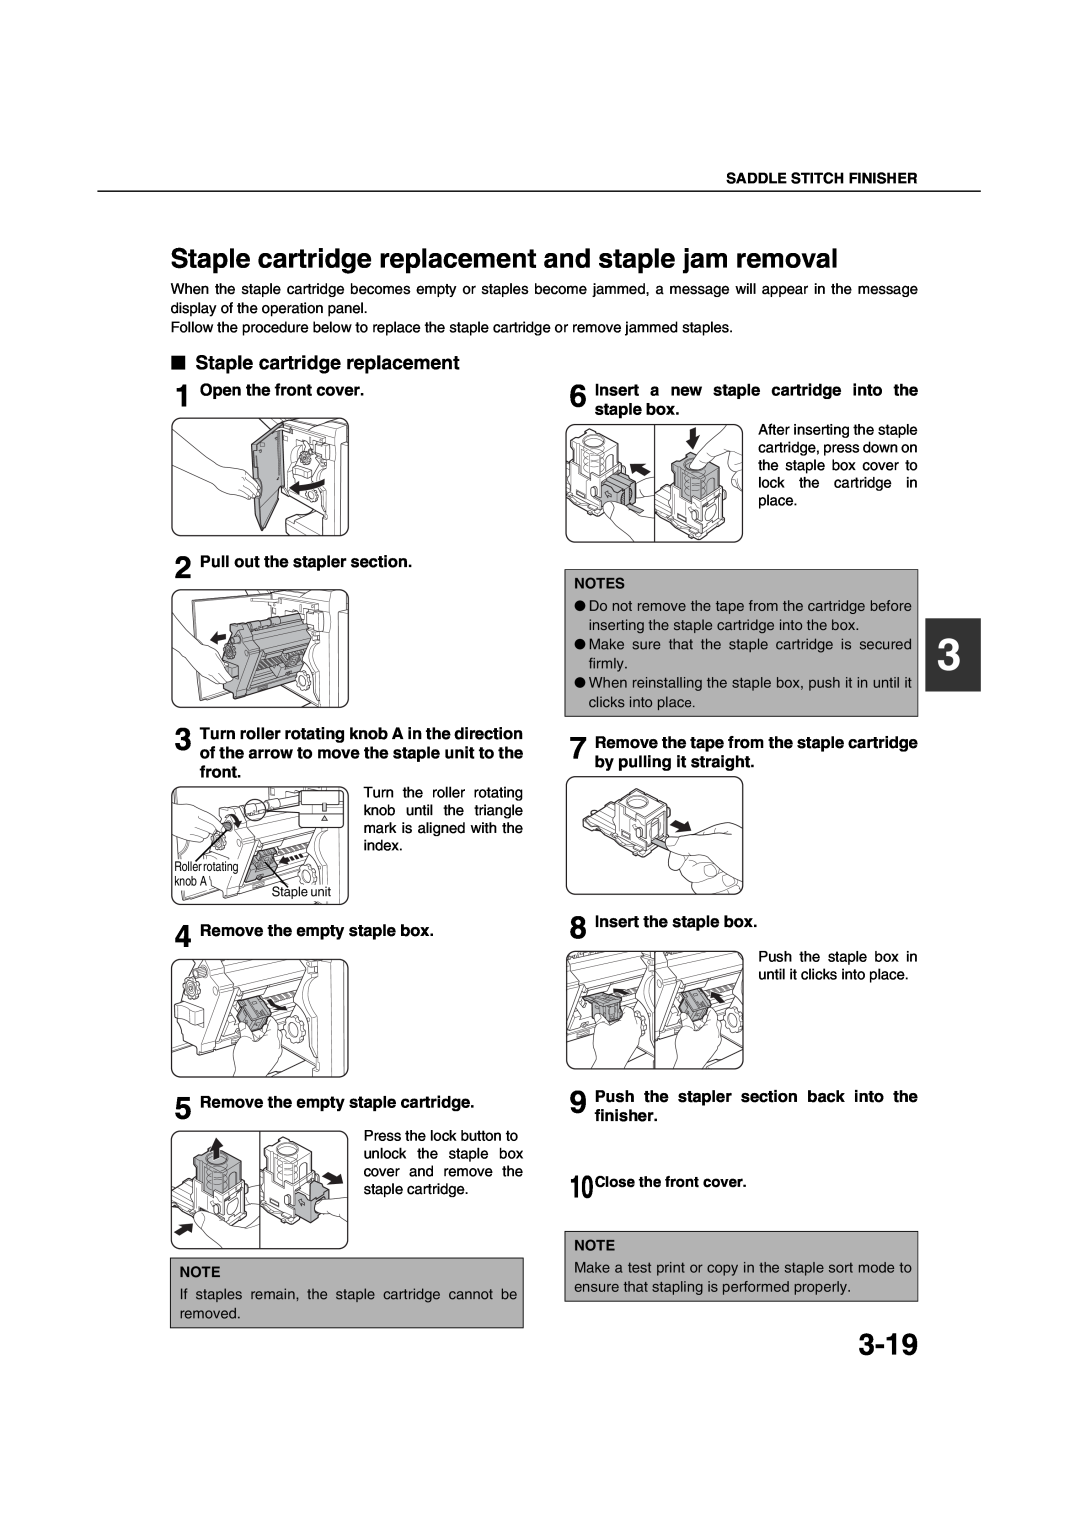 Sharp AR-M451N 3-19, Staple cartridge replacement and staple jam removal, Insert the staple box, Saddle Stitch Finisher 